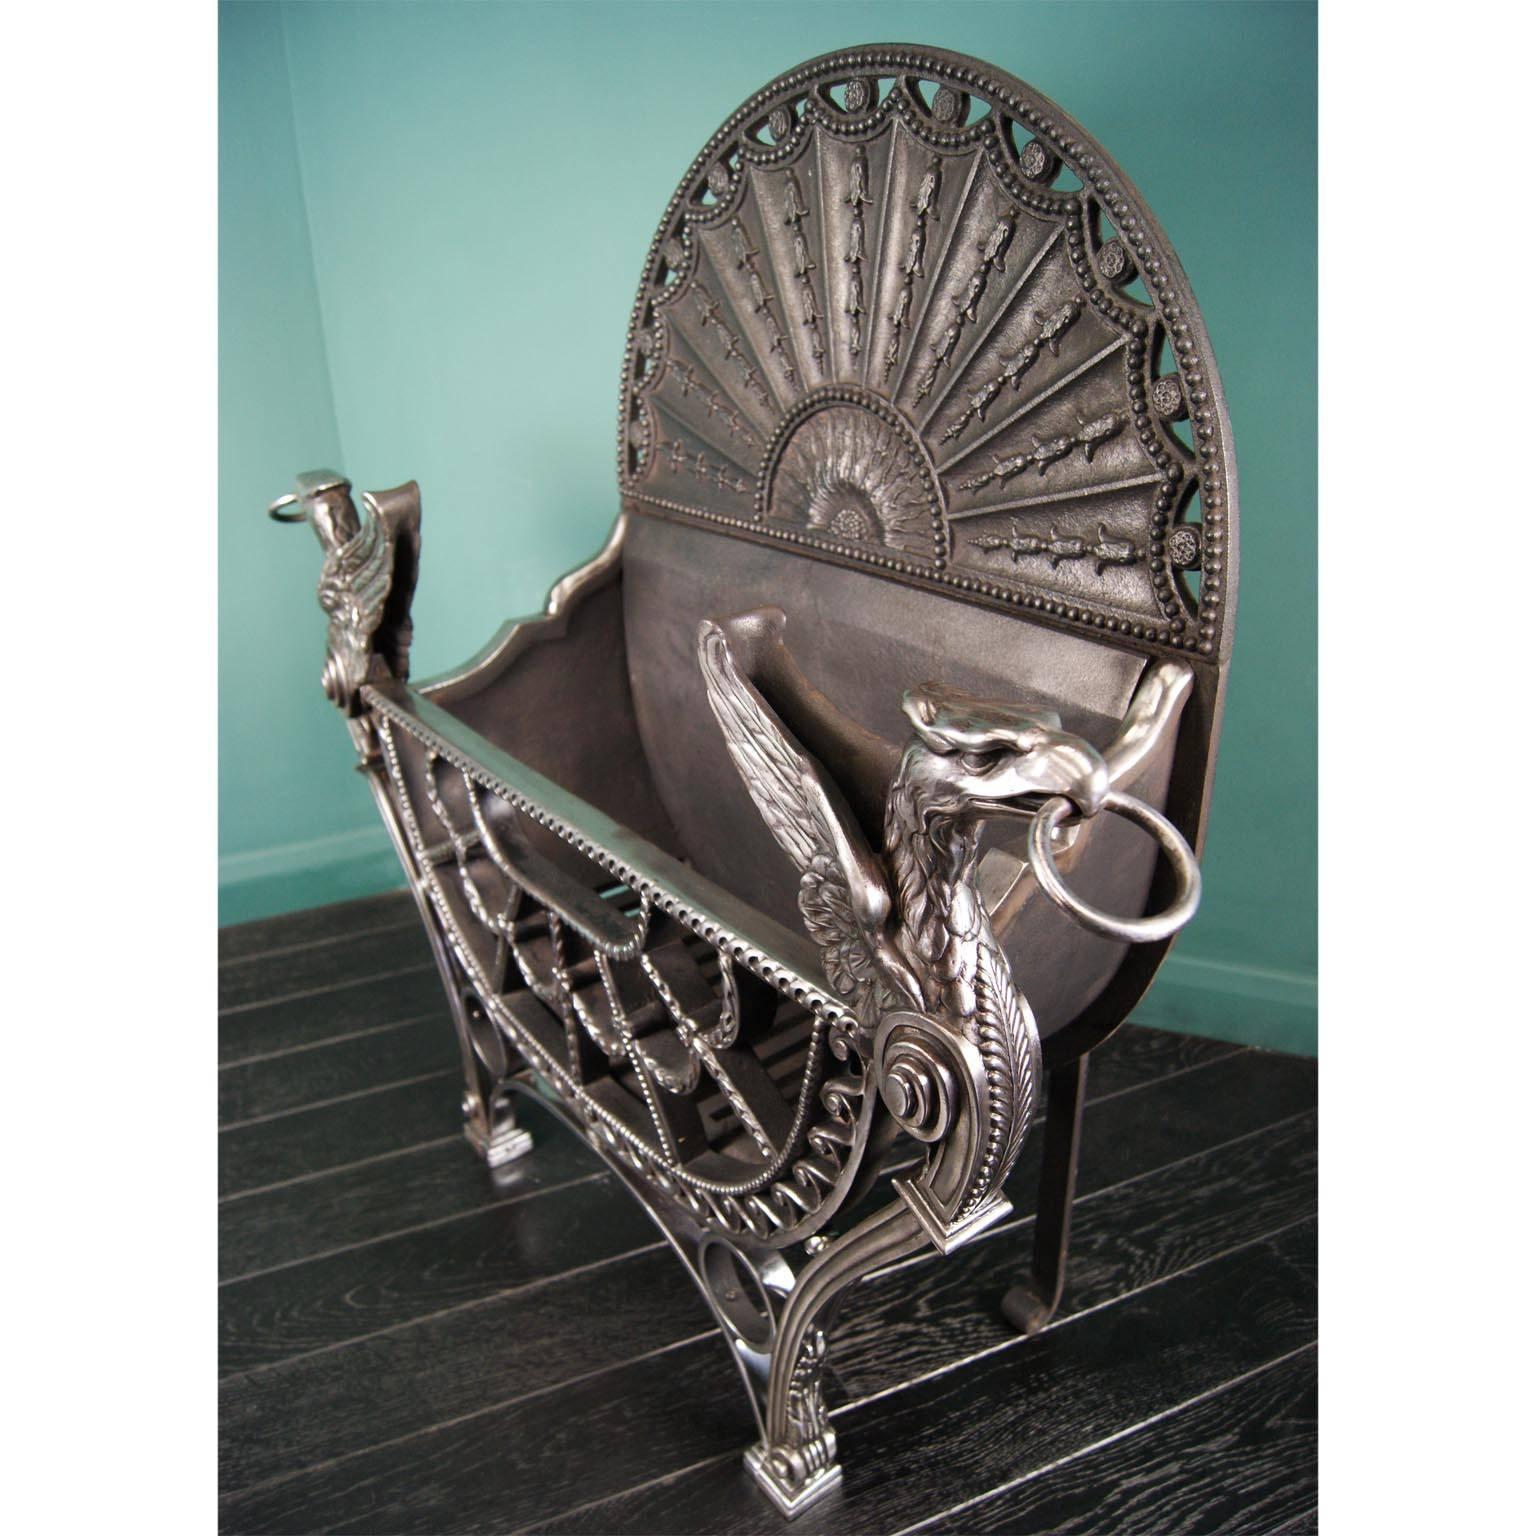 Large English polished wrought and cast iron fire grate in the Regency manner. The openwork fan-front basket is flanked by eagles, with a beaded Adam arched fire back, and bluebell drops in between radiating sunburst bars.